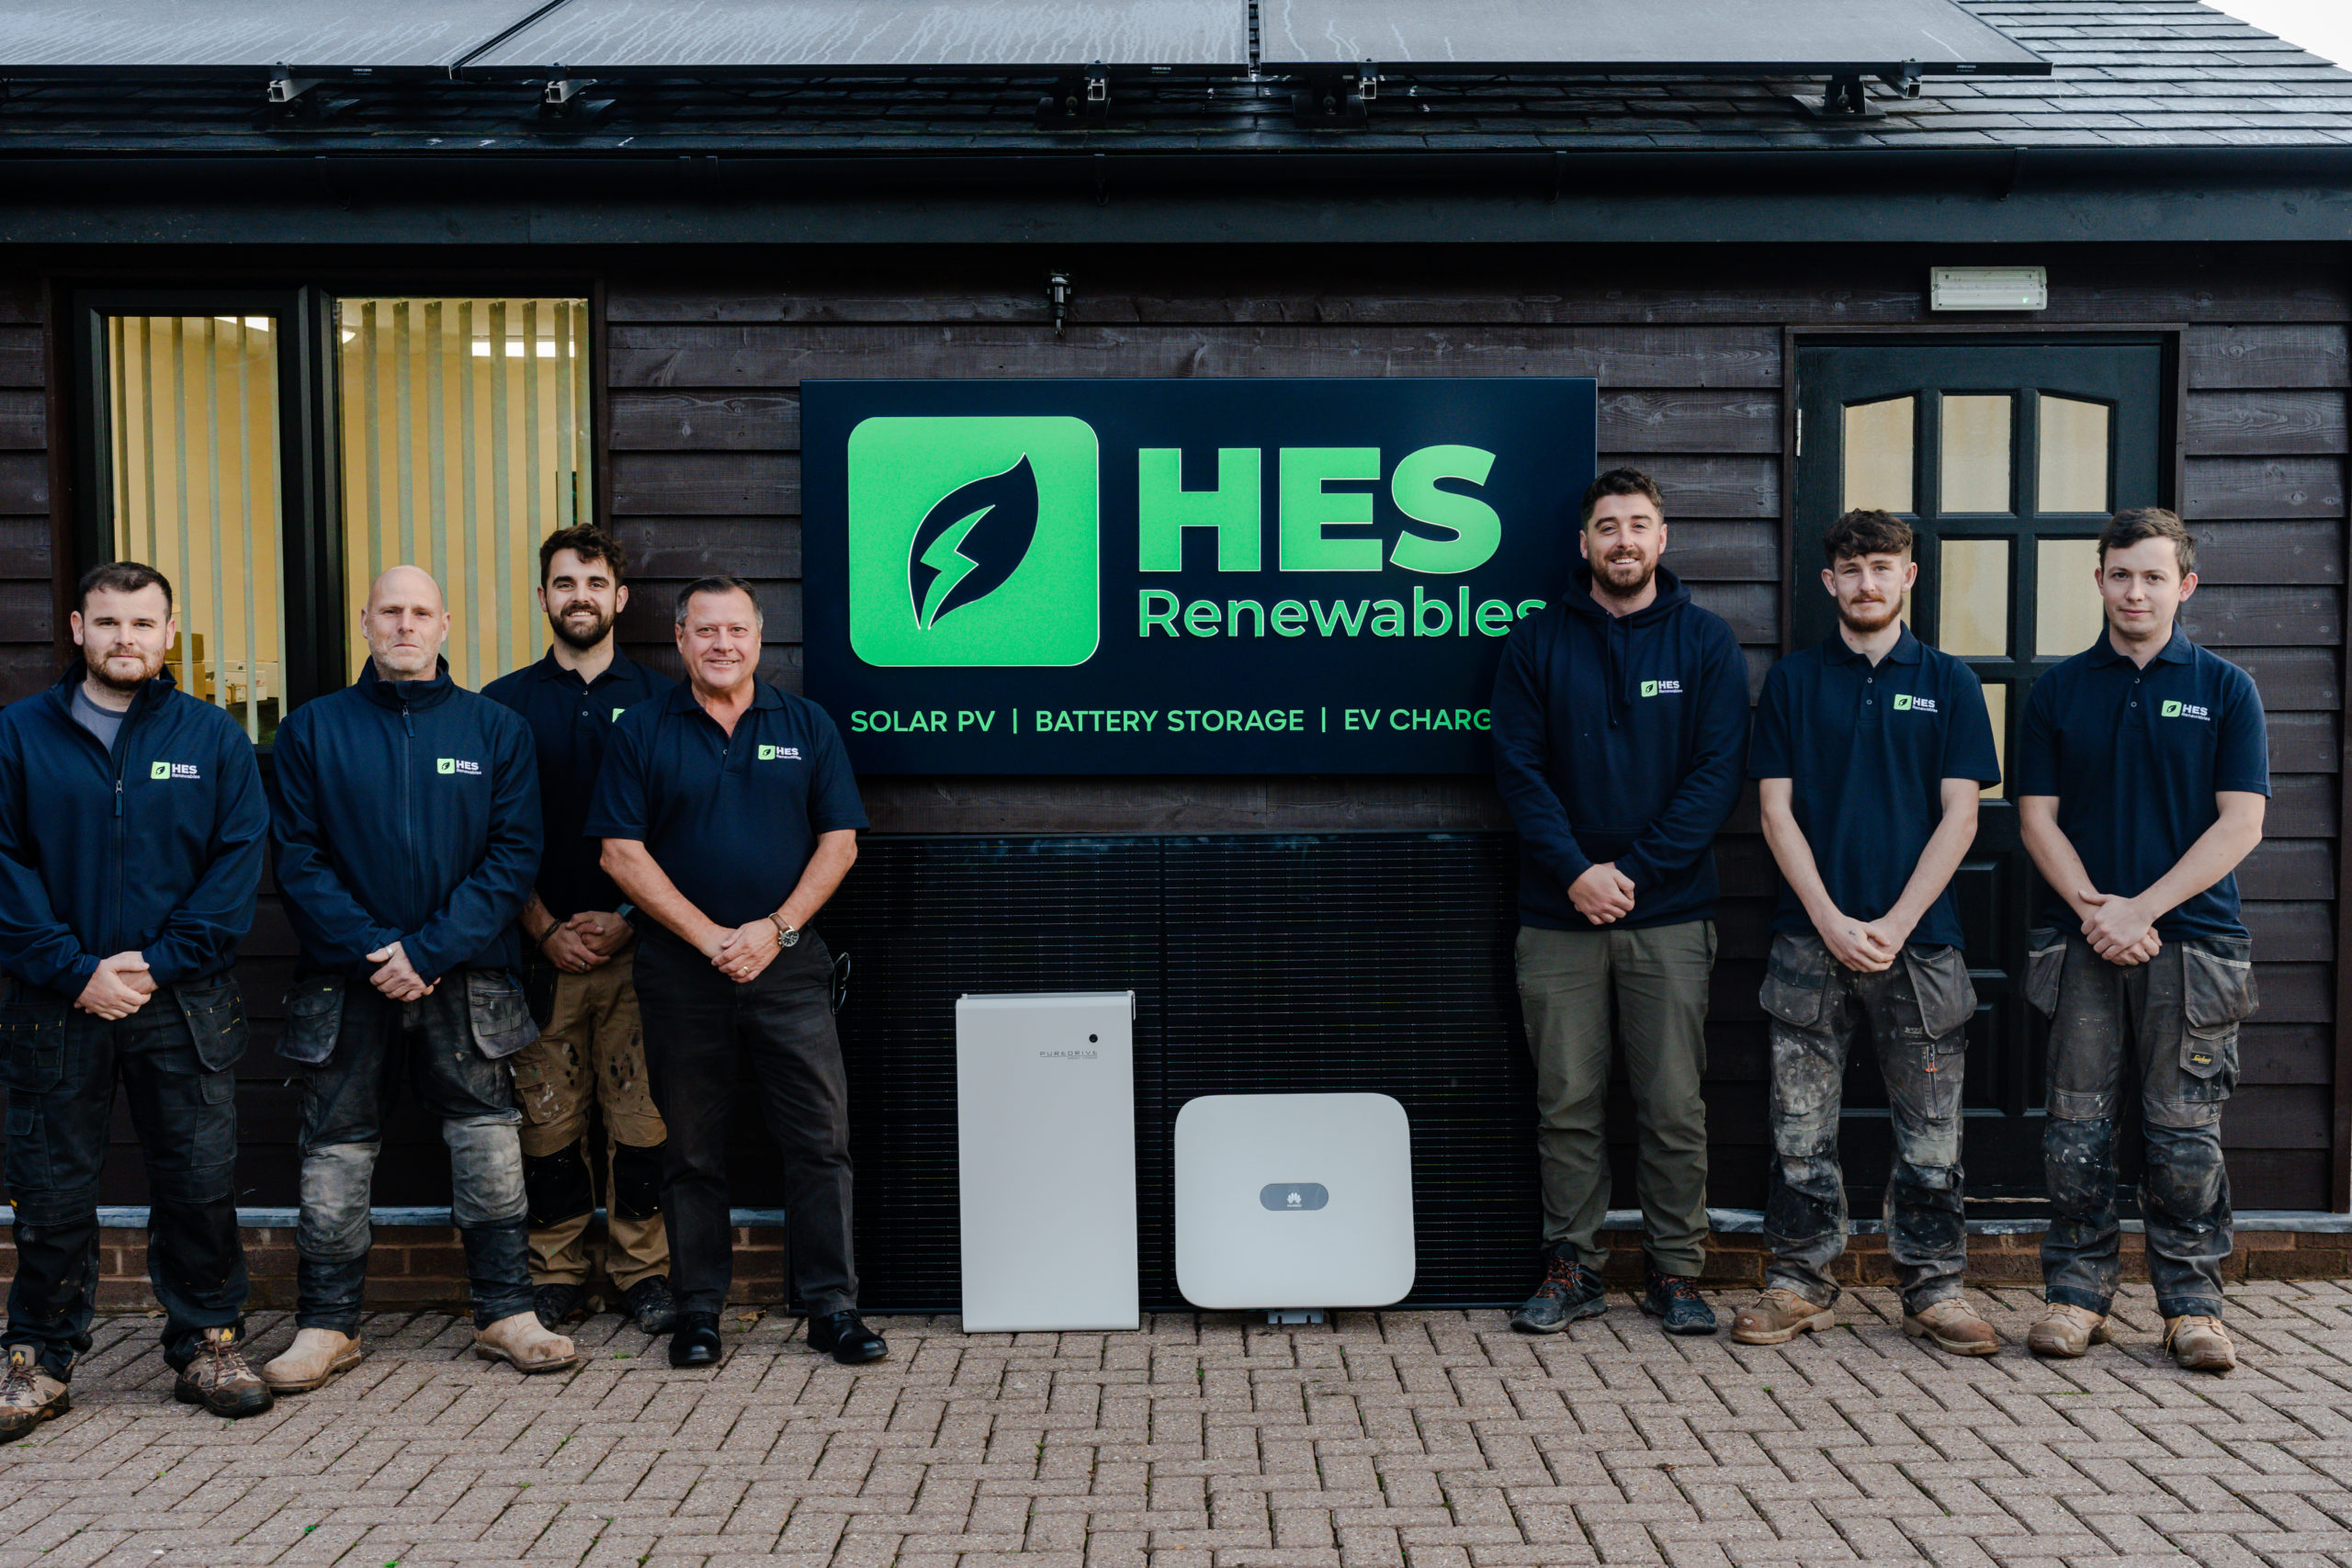 Team photo of HES employees, all committed to delivering quality service. 